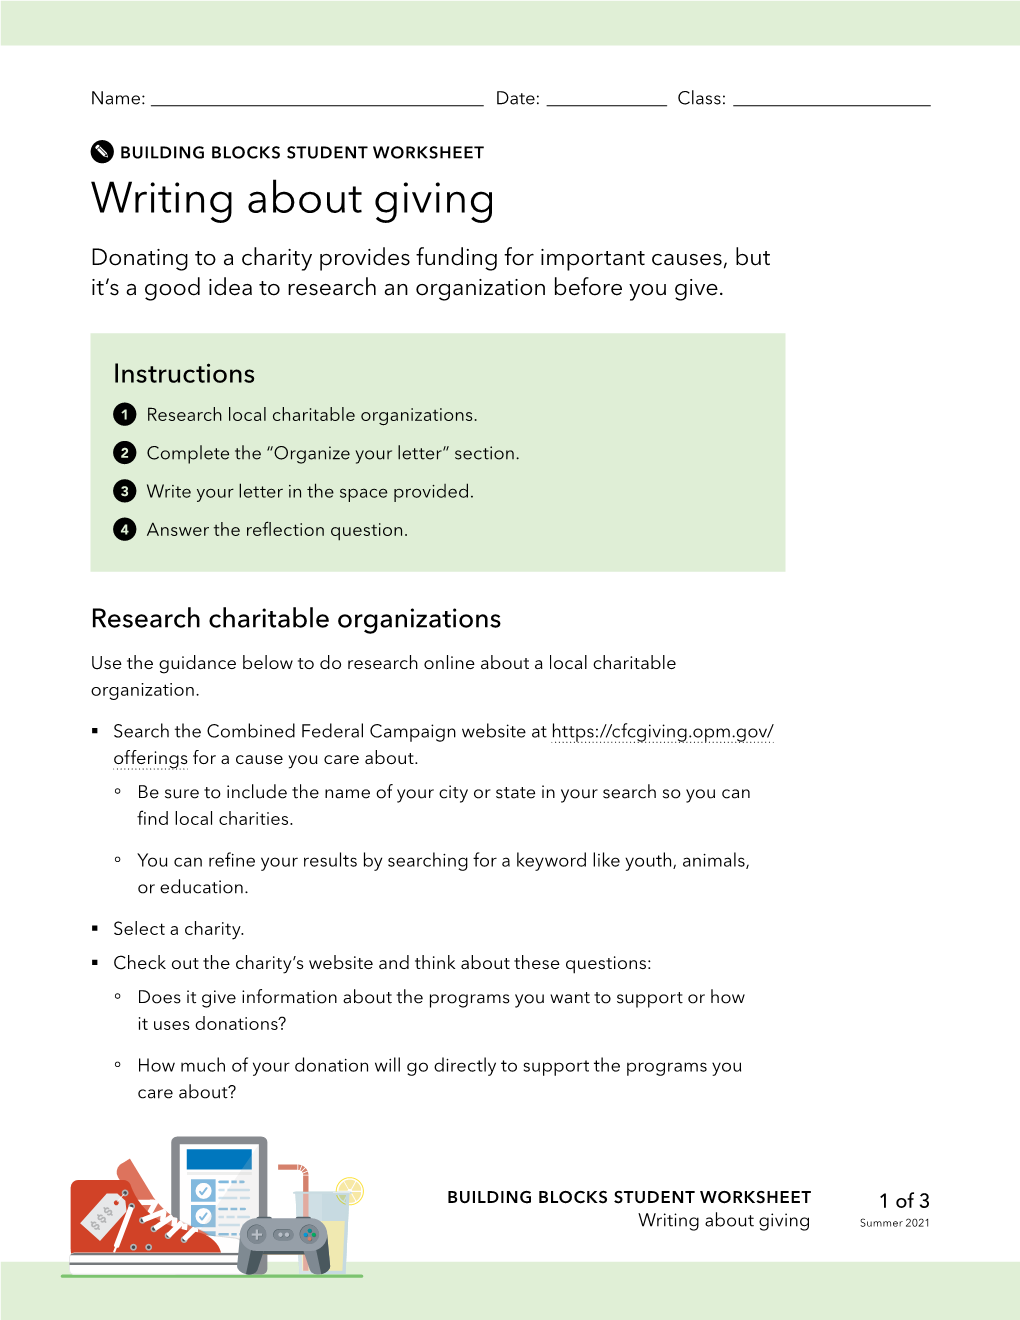 Writing About Giving (Worksheet)